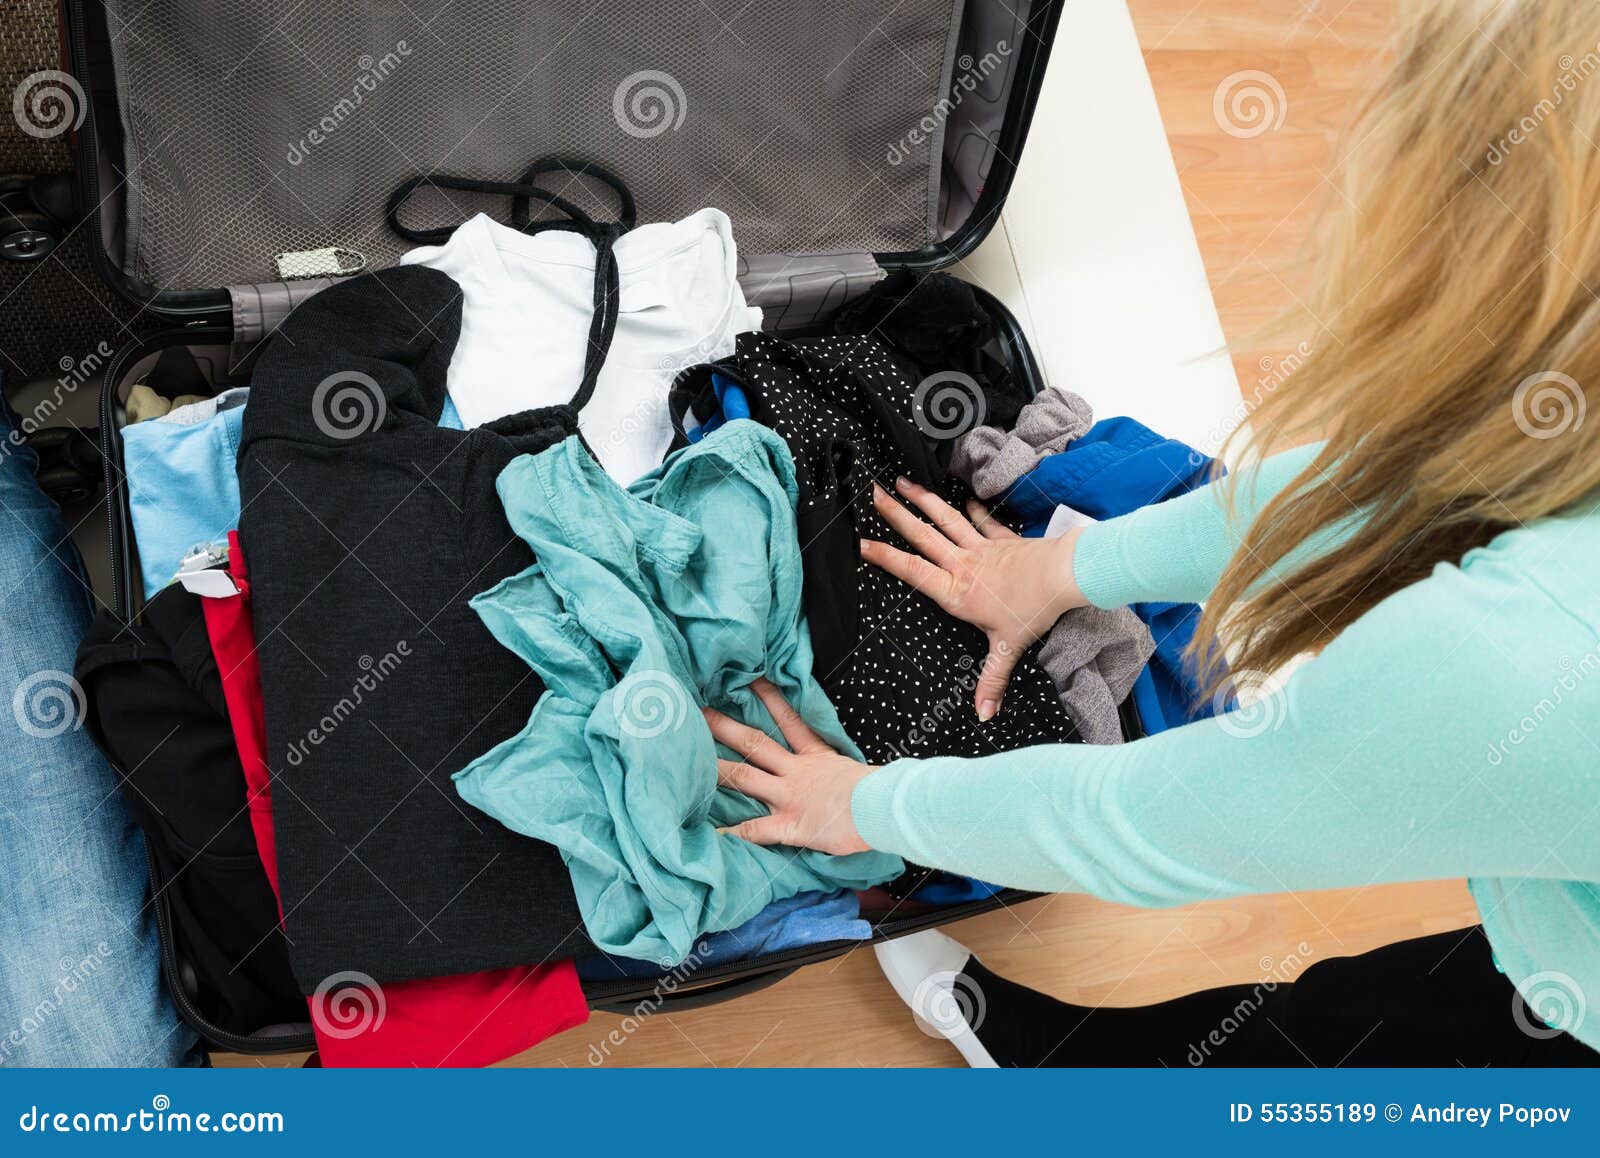 14,602 Woman Clothes Suitcase Stock Photos - Free & Royalty-Free